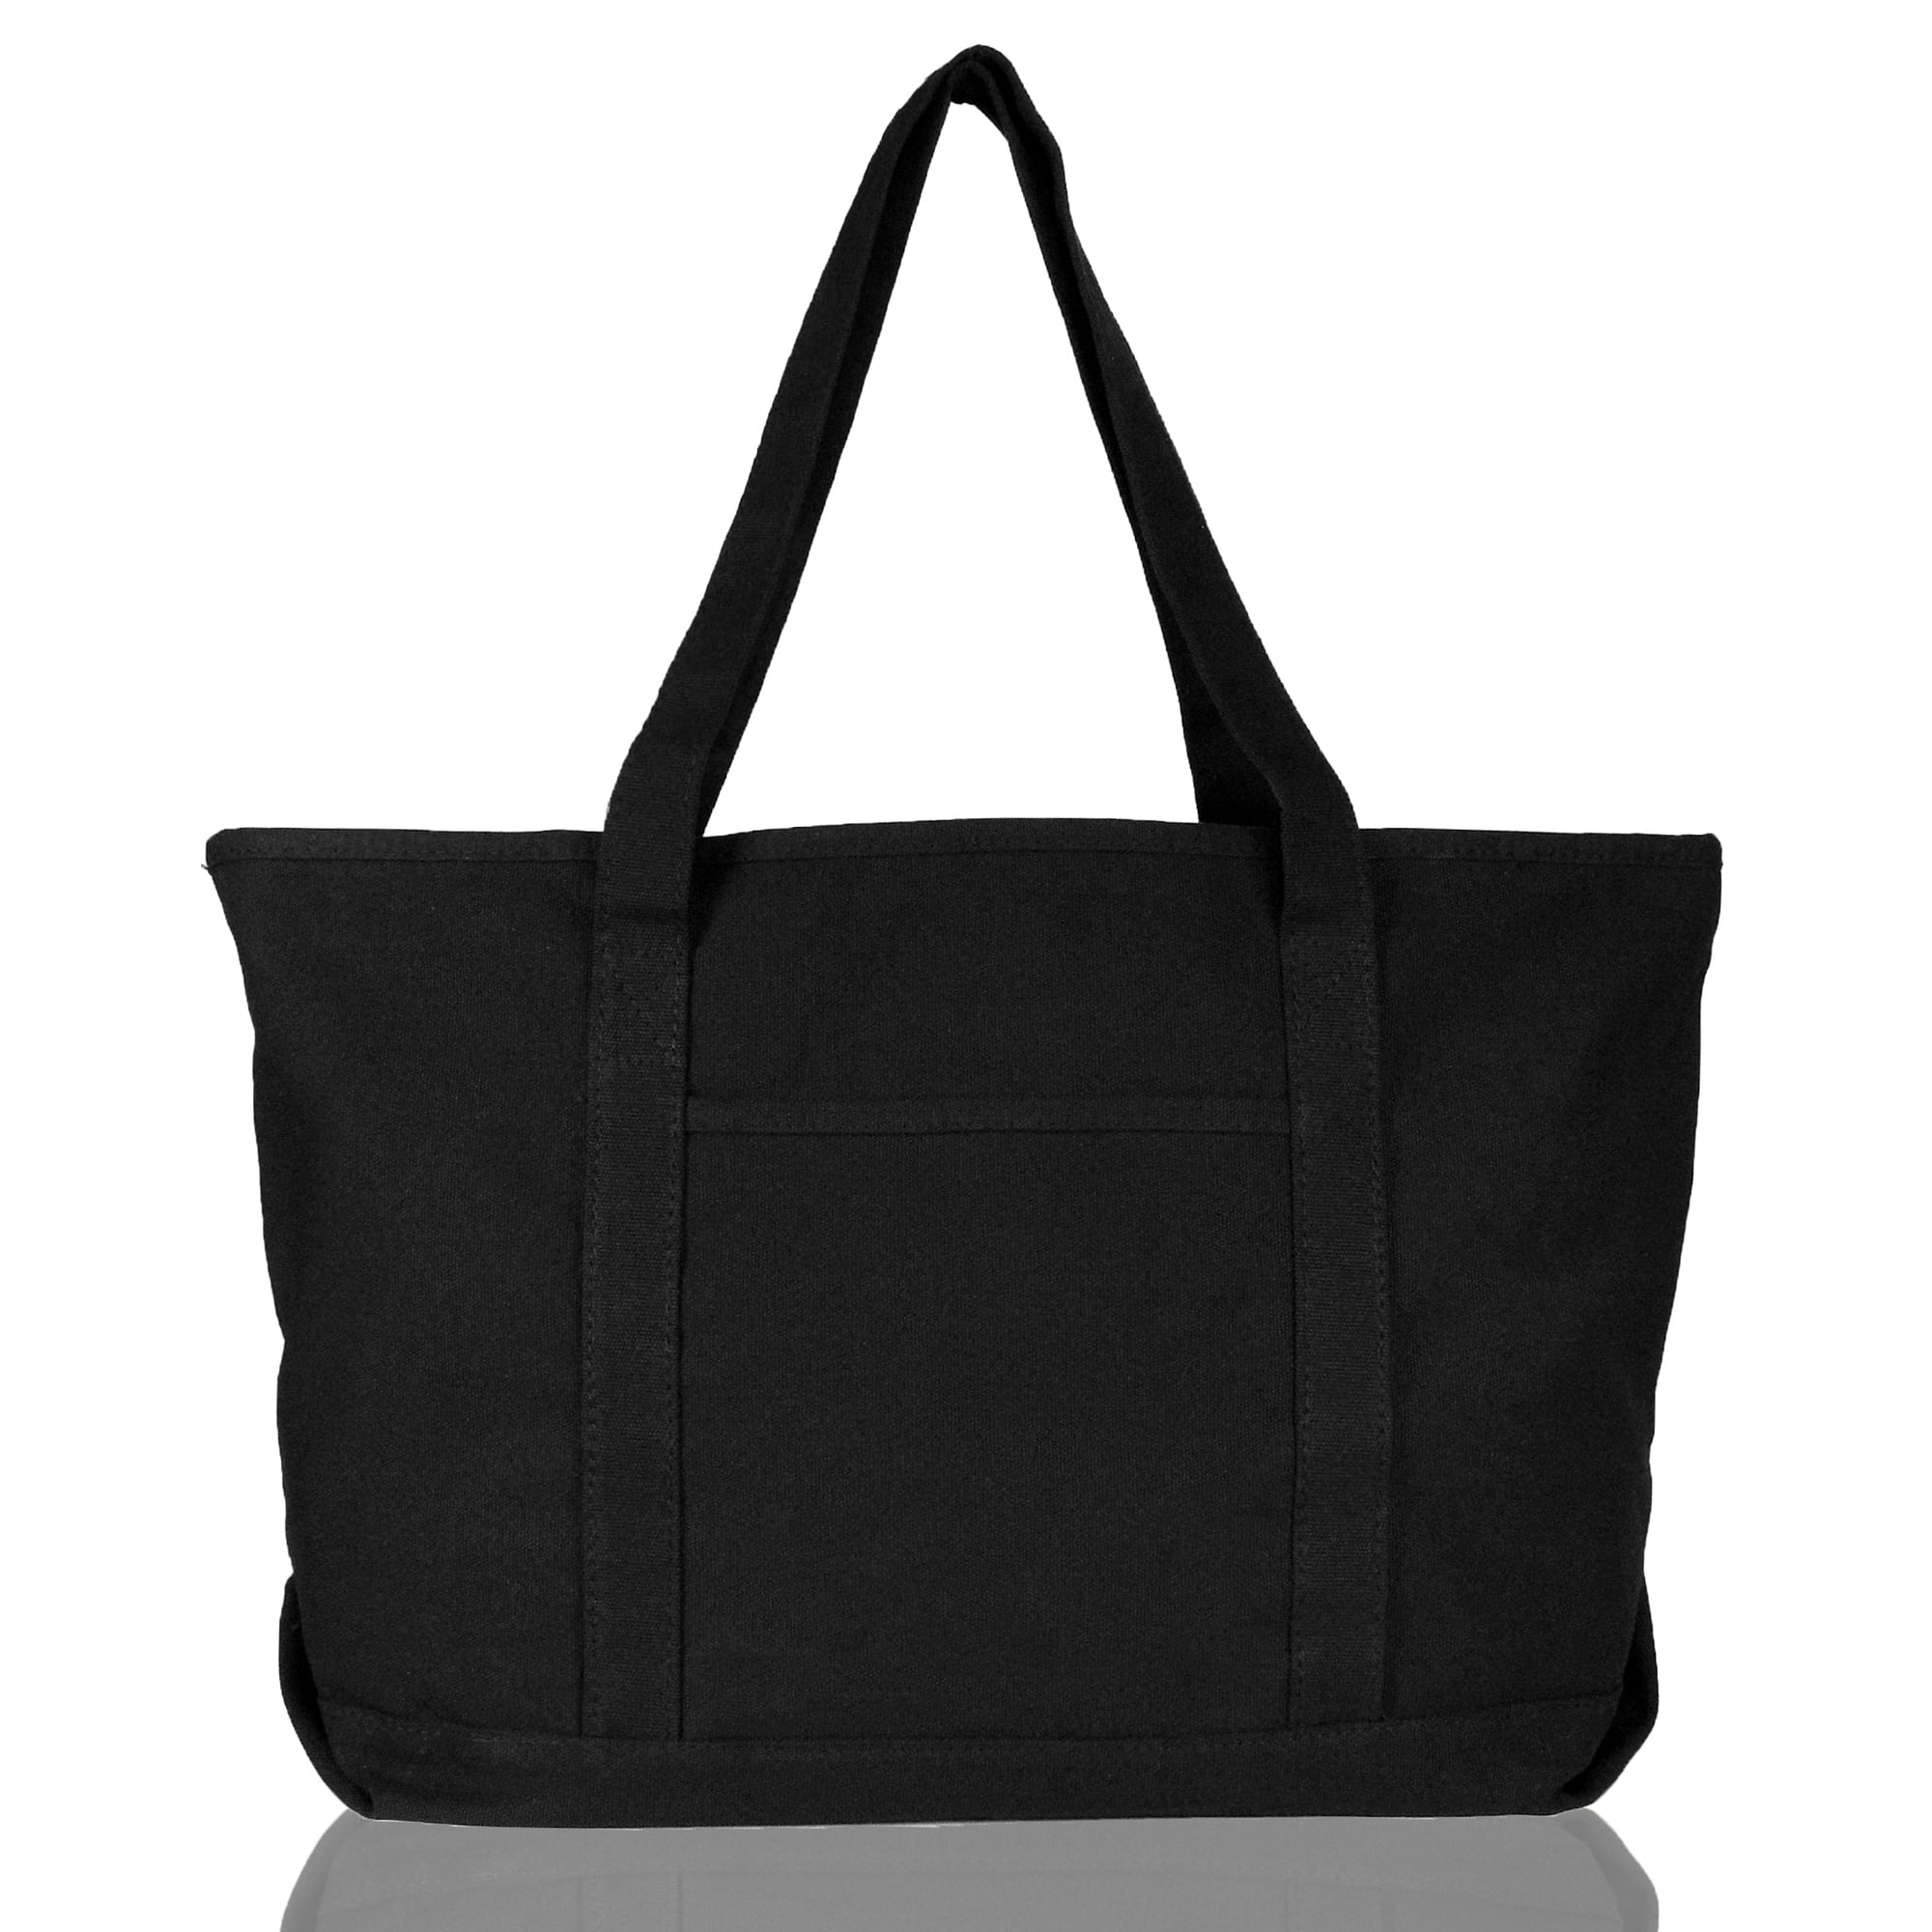 DALIX Womens 23" Deluxe 24 oz. Cotton Canvas Tote Bag Zippered in Black